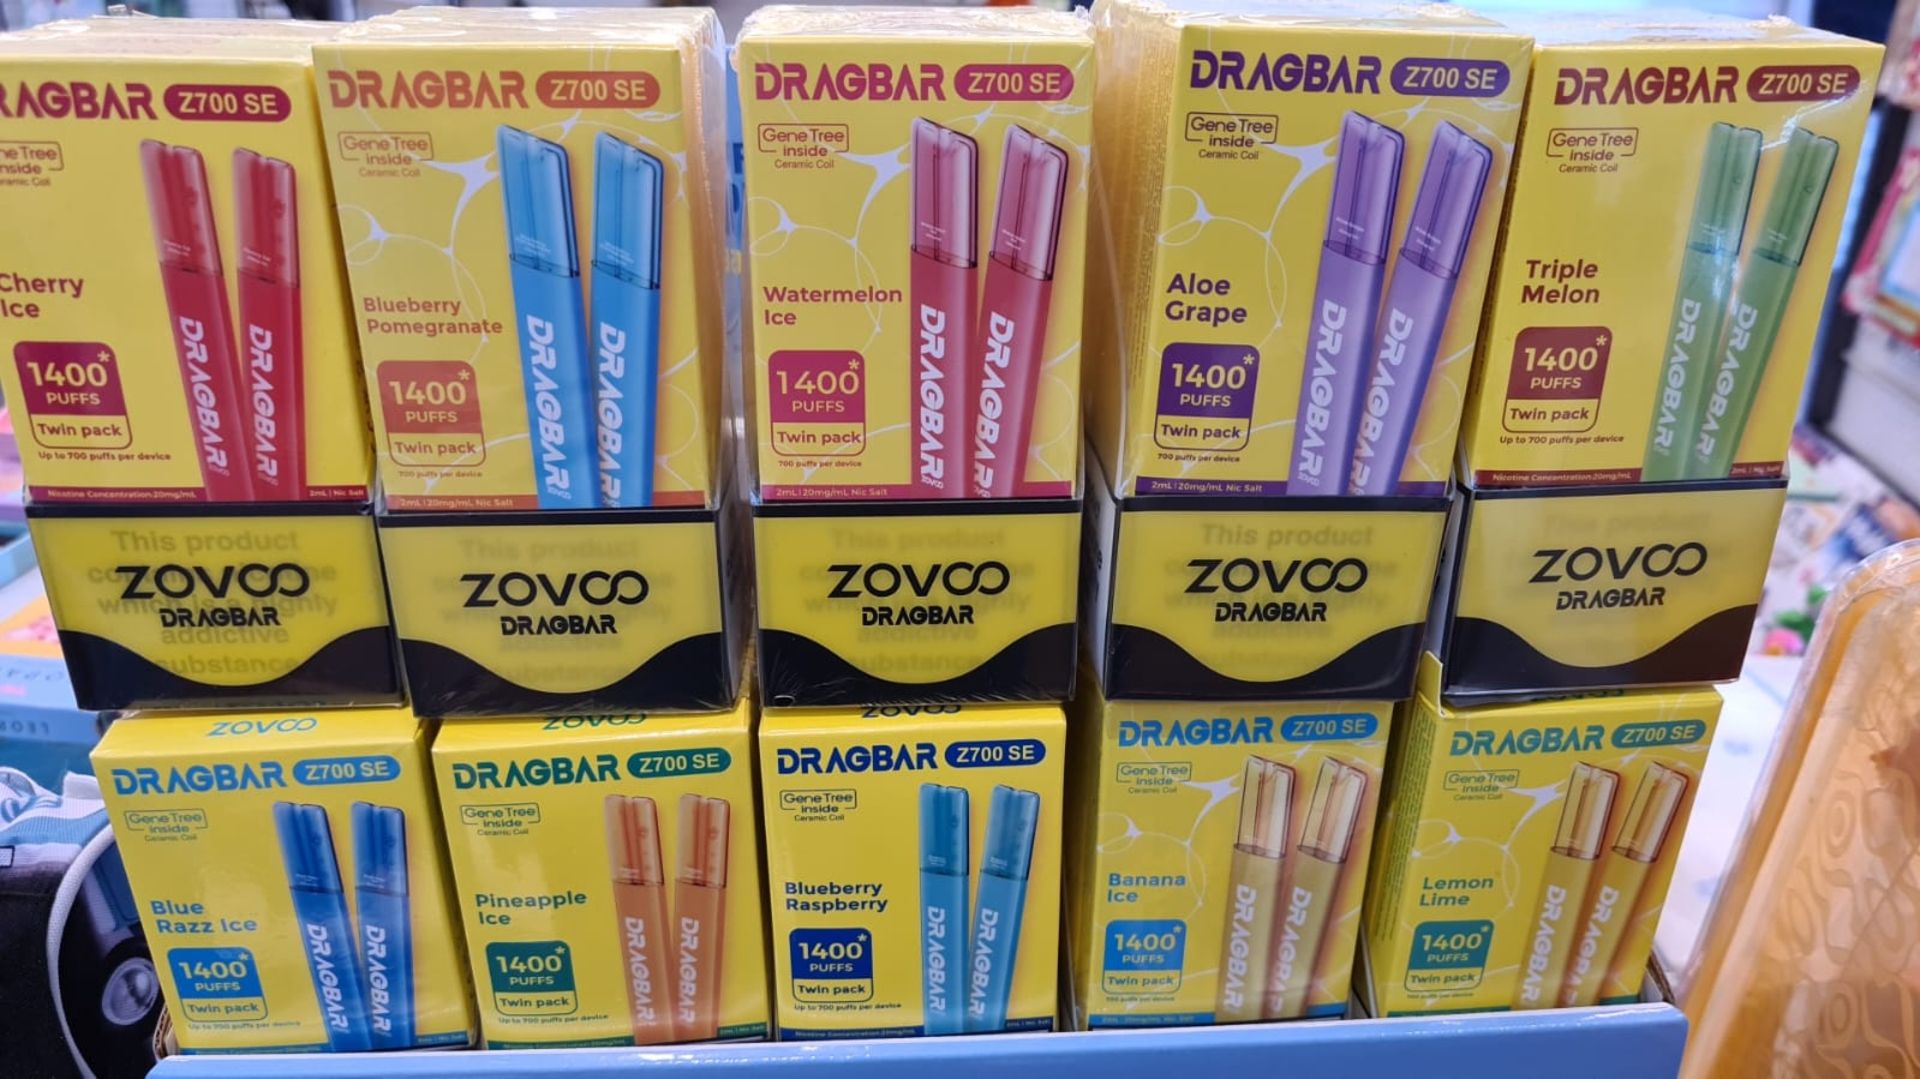 2000 x BRAND NEW DRAGBAR Z700 SE DISPOSABLE VAPES - 10 FLAVOURS INCLUDED (1000 PACKS) - Image 2 of 5